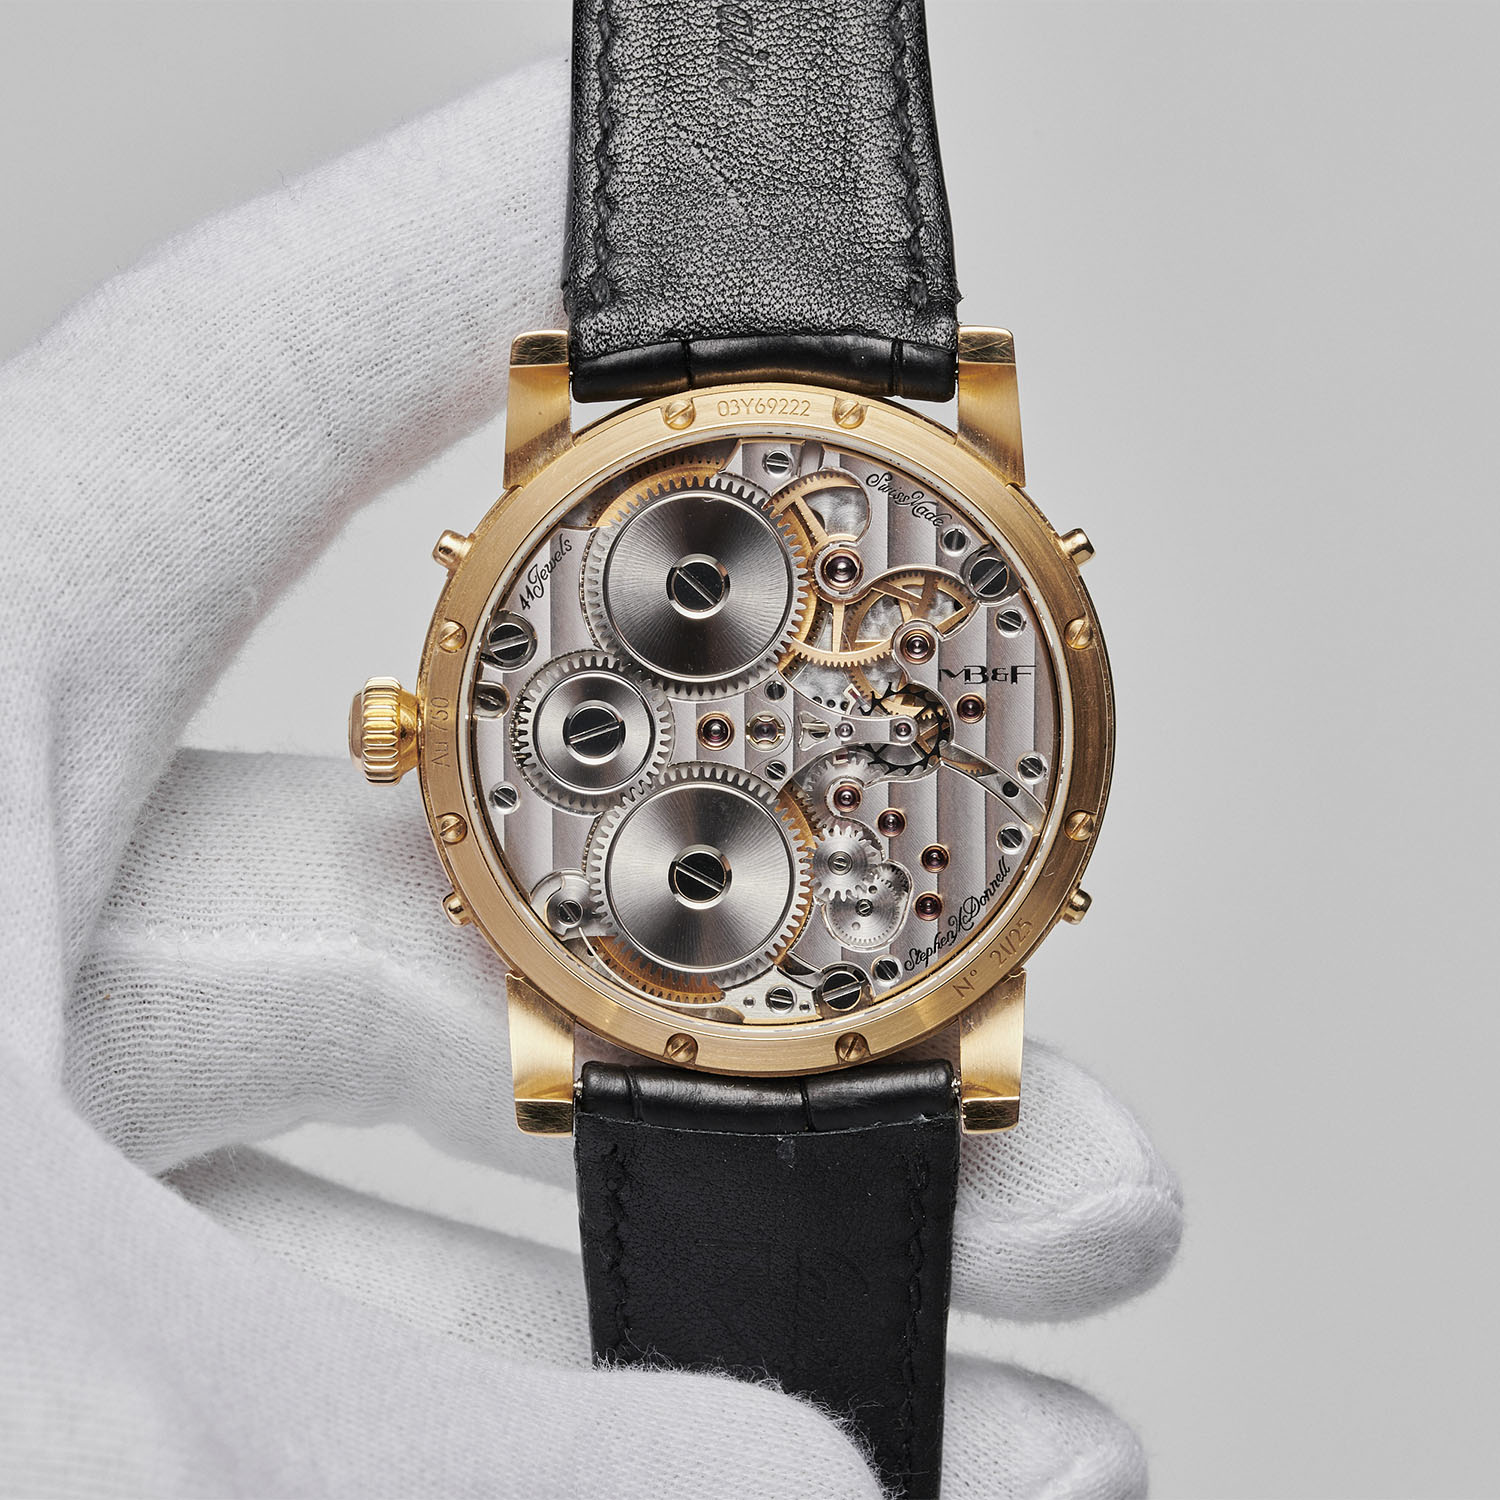 auction-preview-top-lots-october-2022-ineichen-sale-complications-mbandf-legacy-perpetual-2